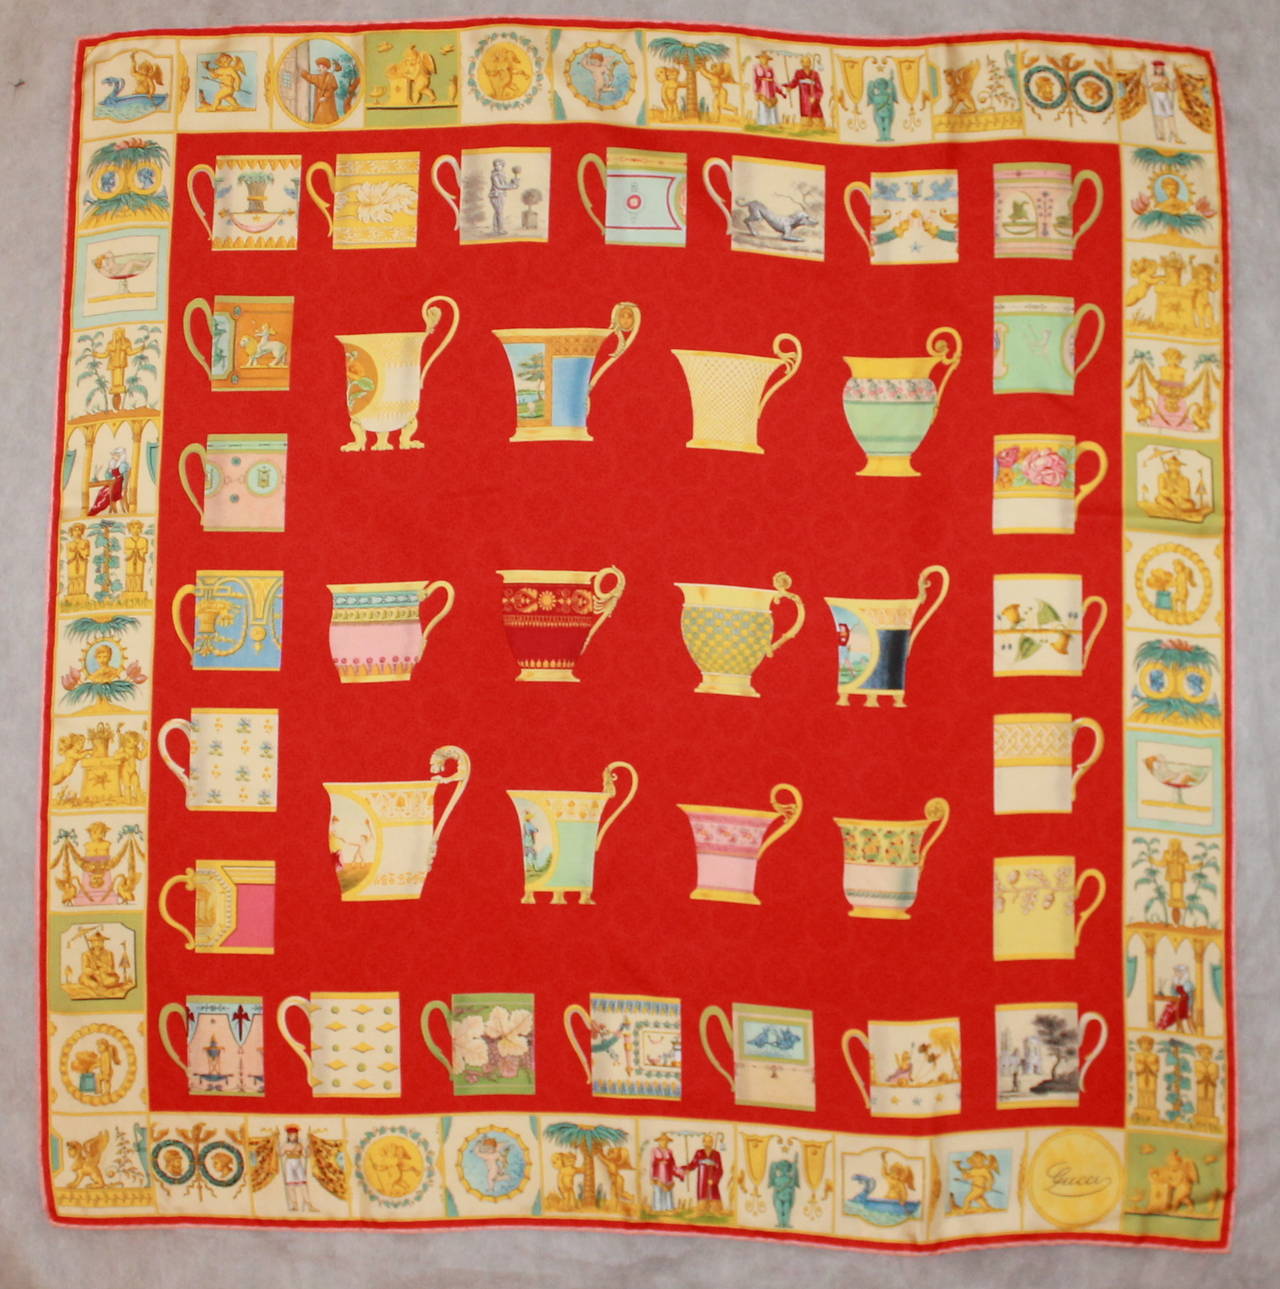 Gucci Red Tea Cup Printed Silk Scarf. This scarf is in excellent condition and has a courtly themed print trim. 

Length- 33.5